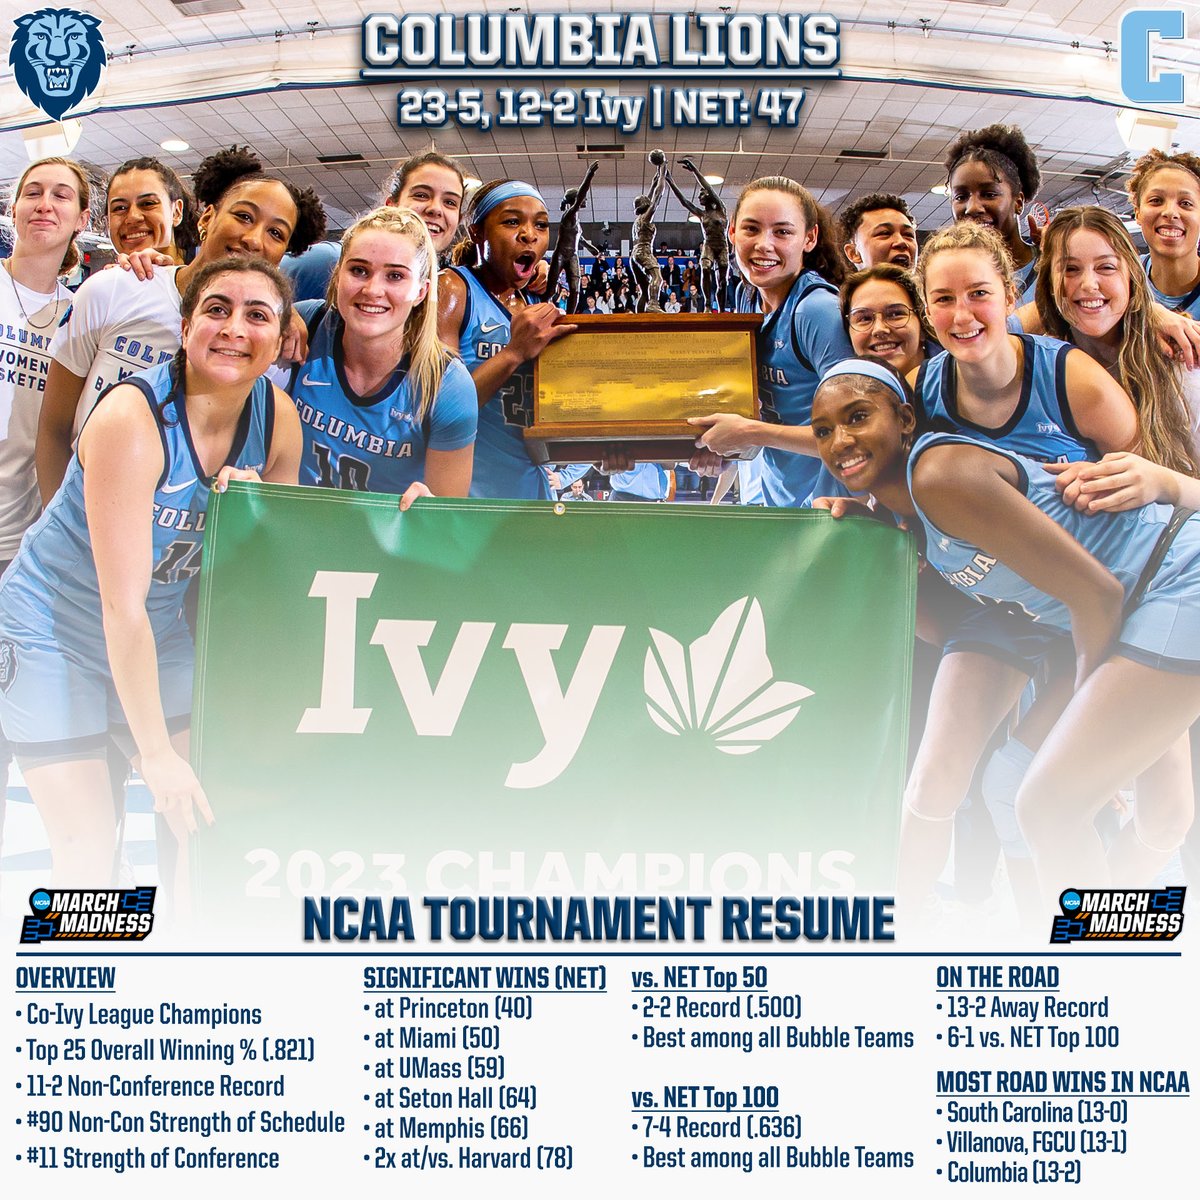 📝 Our @MarchMadnessWBB Resume ➡️ 23-5 Overall, Co-@IvyLeague Champs ➡️ Best Record vs. NET Top 50 among all @ESPN_WomenHoop Bubble Teams ➡️ Best Record vs. NET Top 100 among all ESPN Bubble Teams ➡️ Tied w/ @GamecockWBB, @novawbb & @FGCU_WBB for most road wins in #NCAAWBB…